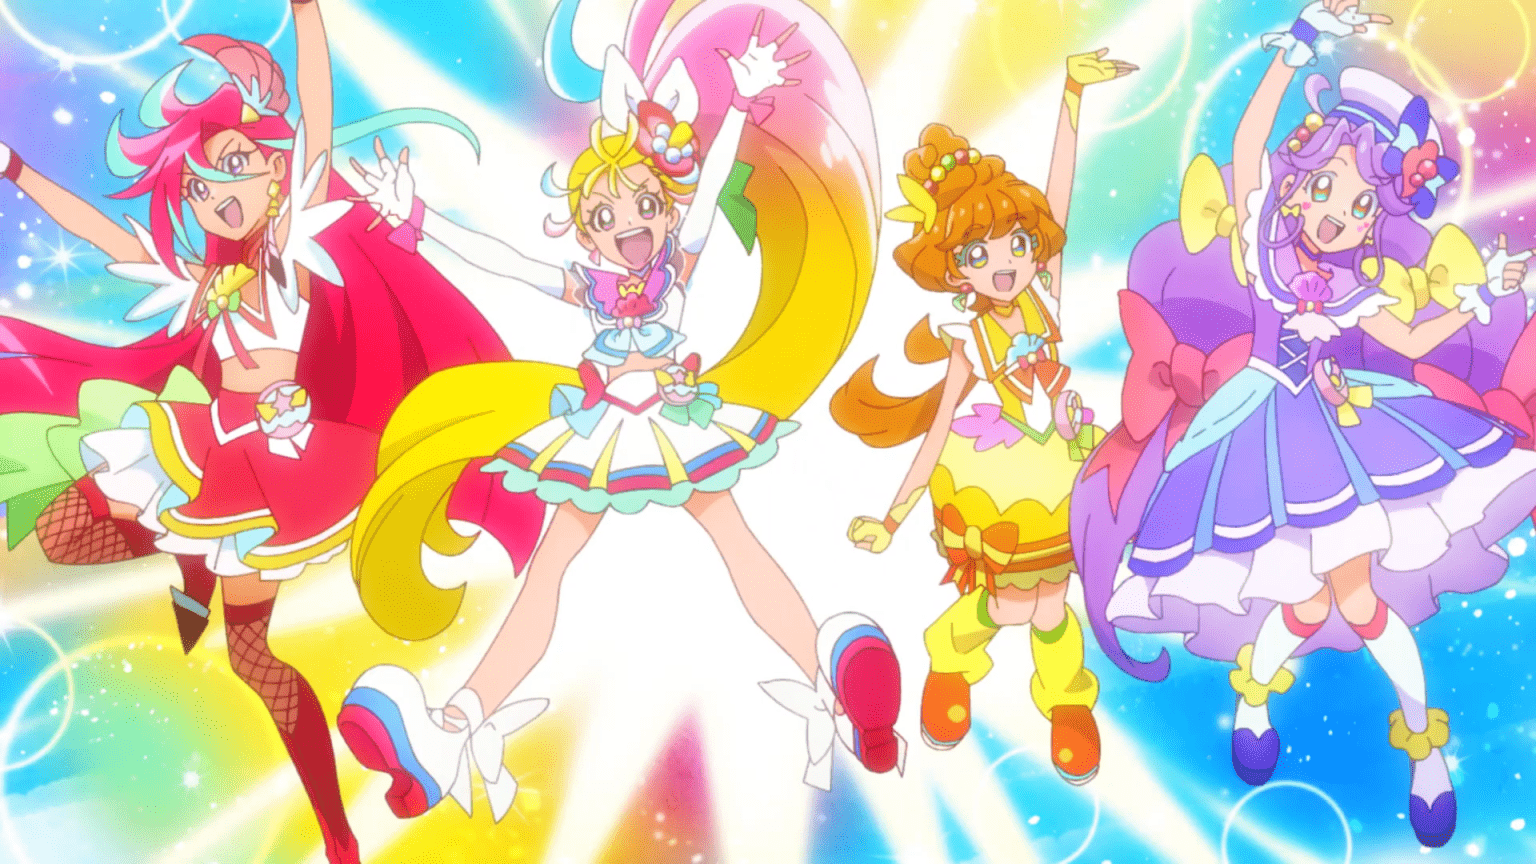 Tropical Rouge PreCure will be crossing over with the girls of HeartCatch